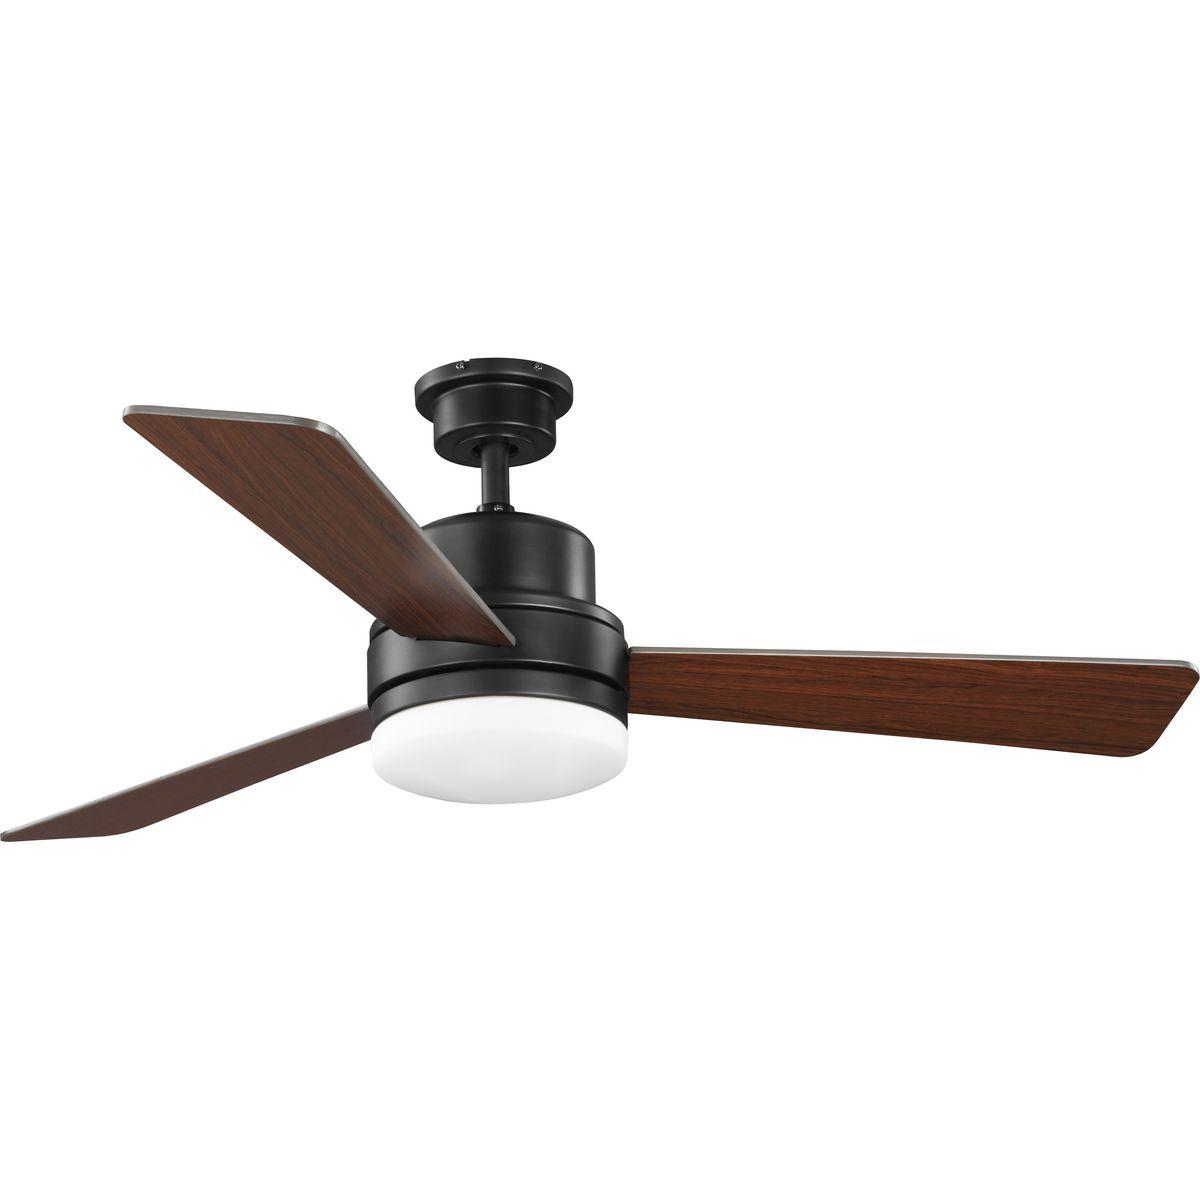 Hubbell P2553-129WB This ceiling fan includes two LED bulbs covered by a white opal shade to help extend your day into the evening. You and your family will relax in your peaceful retreat created by the cool breeze coming from the three-blades rotating overhead. The fixture 